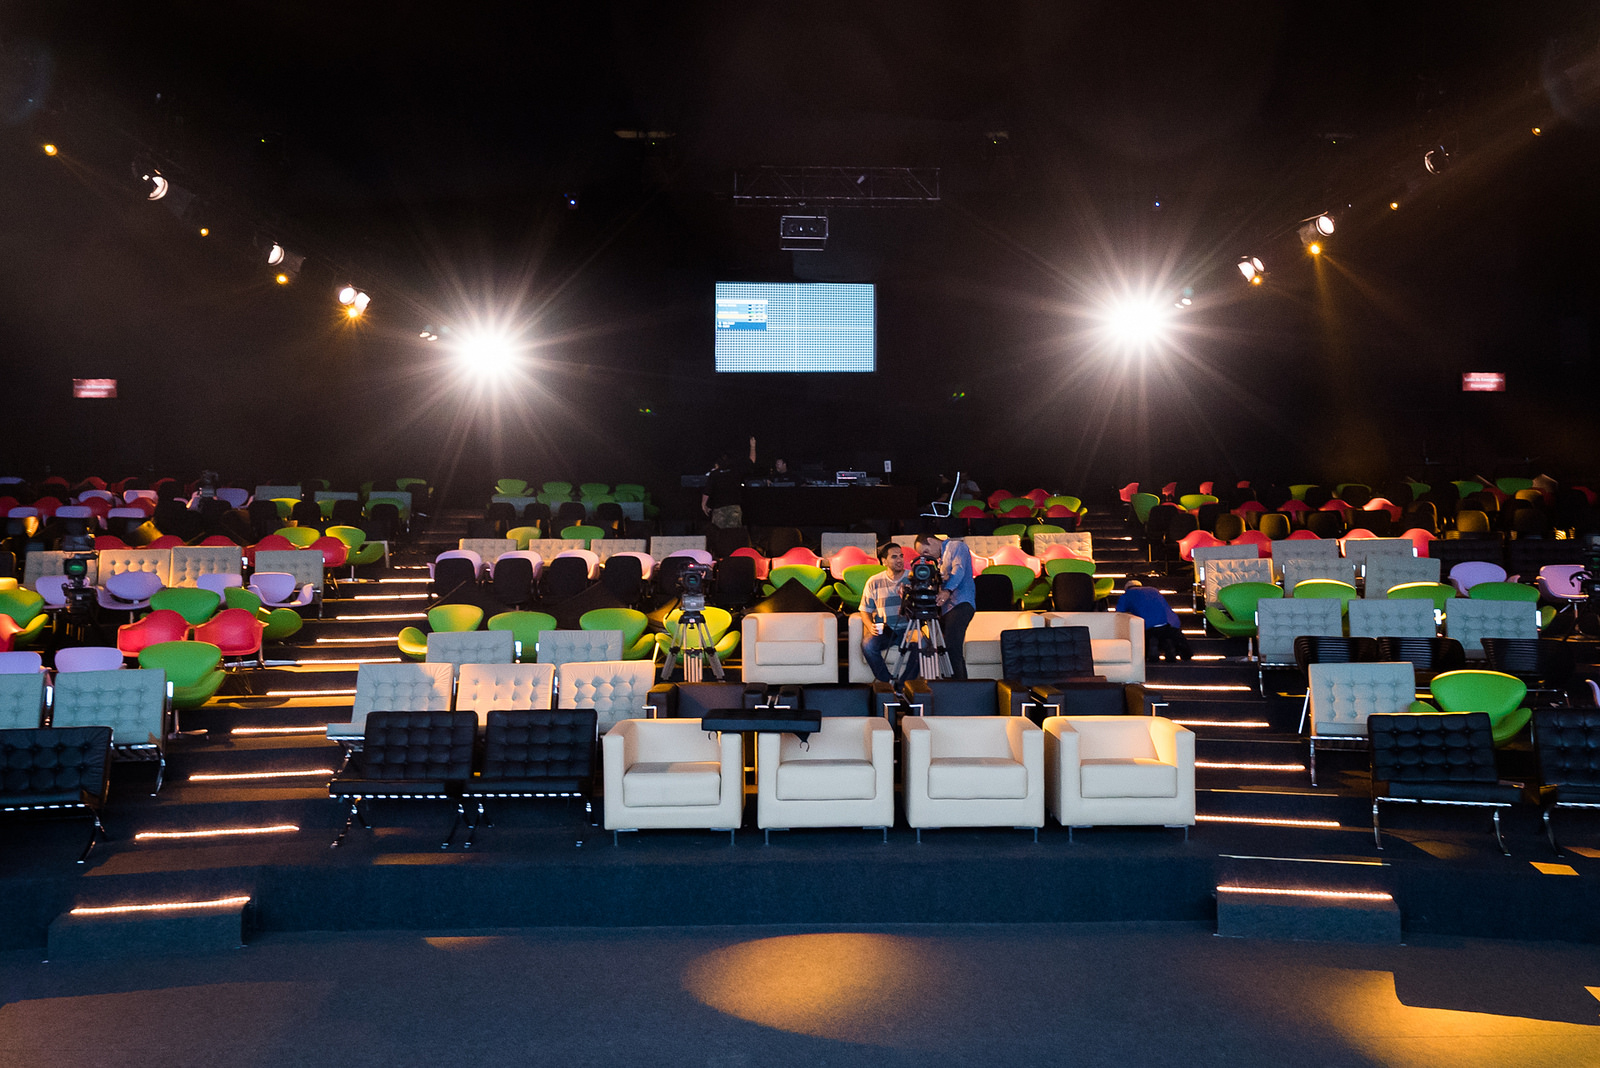 Seating for attendees gets loaded into the mainstage theater. Photo: James Duncan Davidson